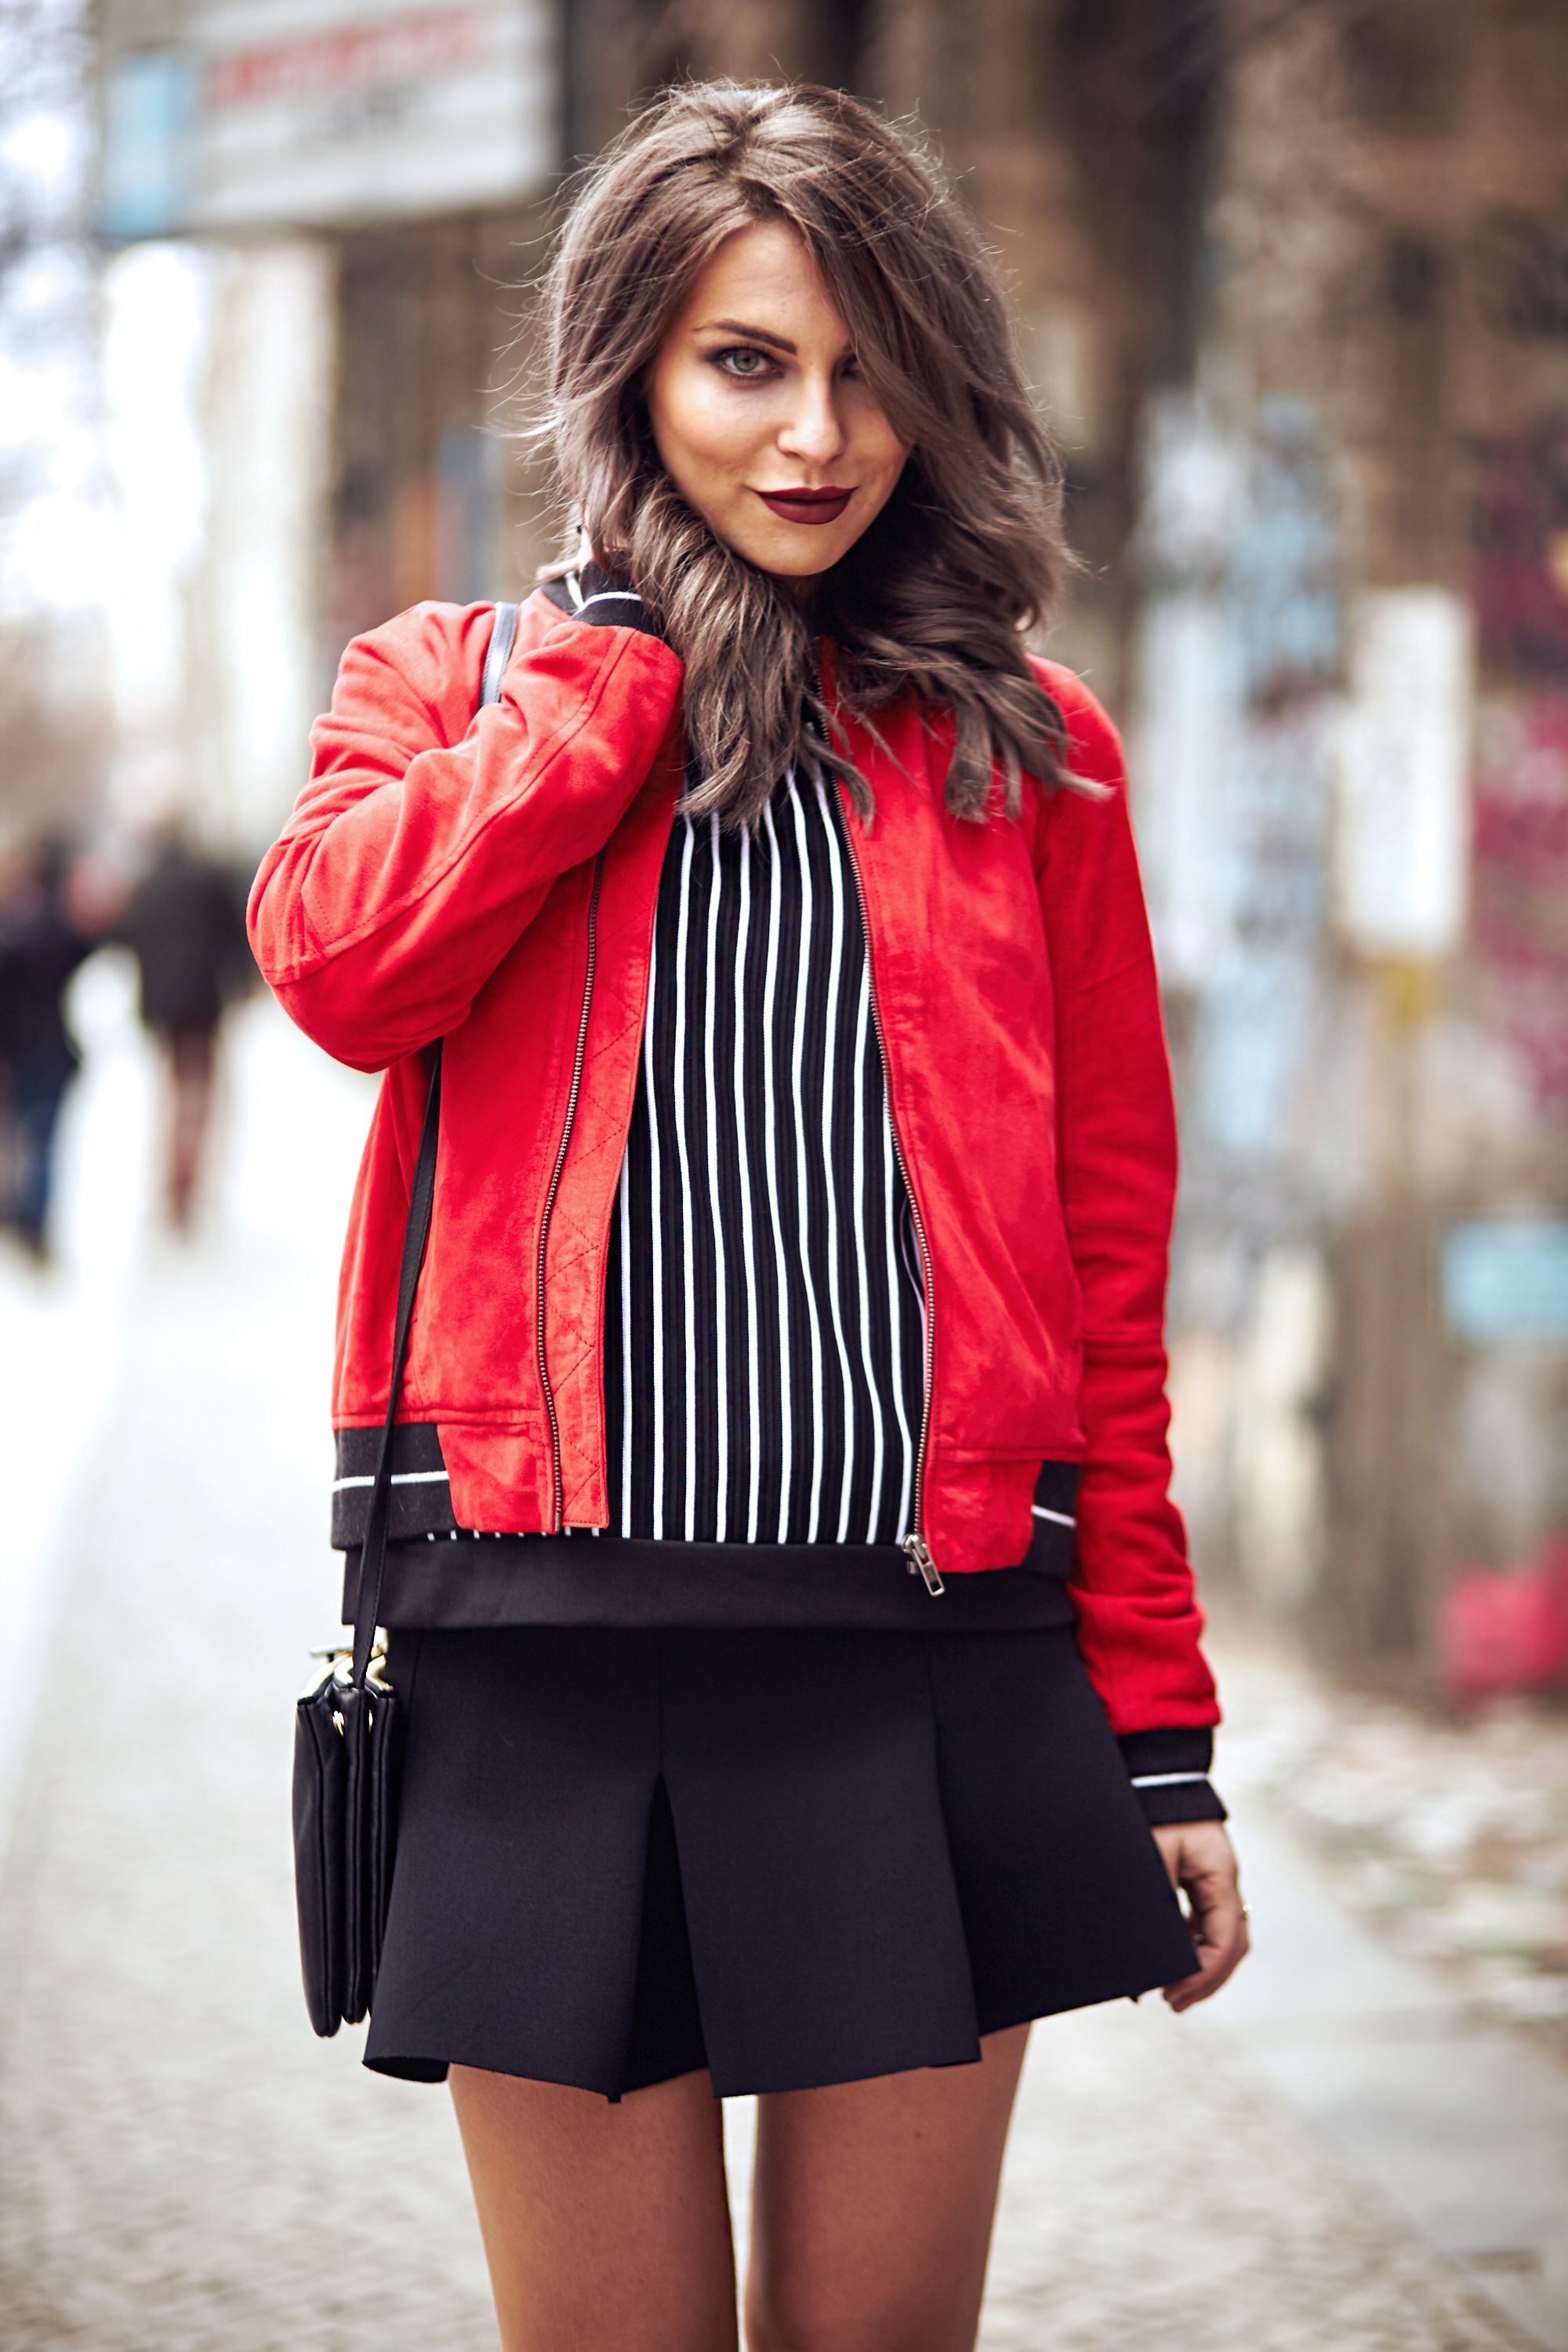 red-black-outfit-college-outfit-9